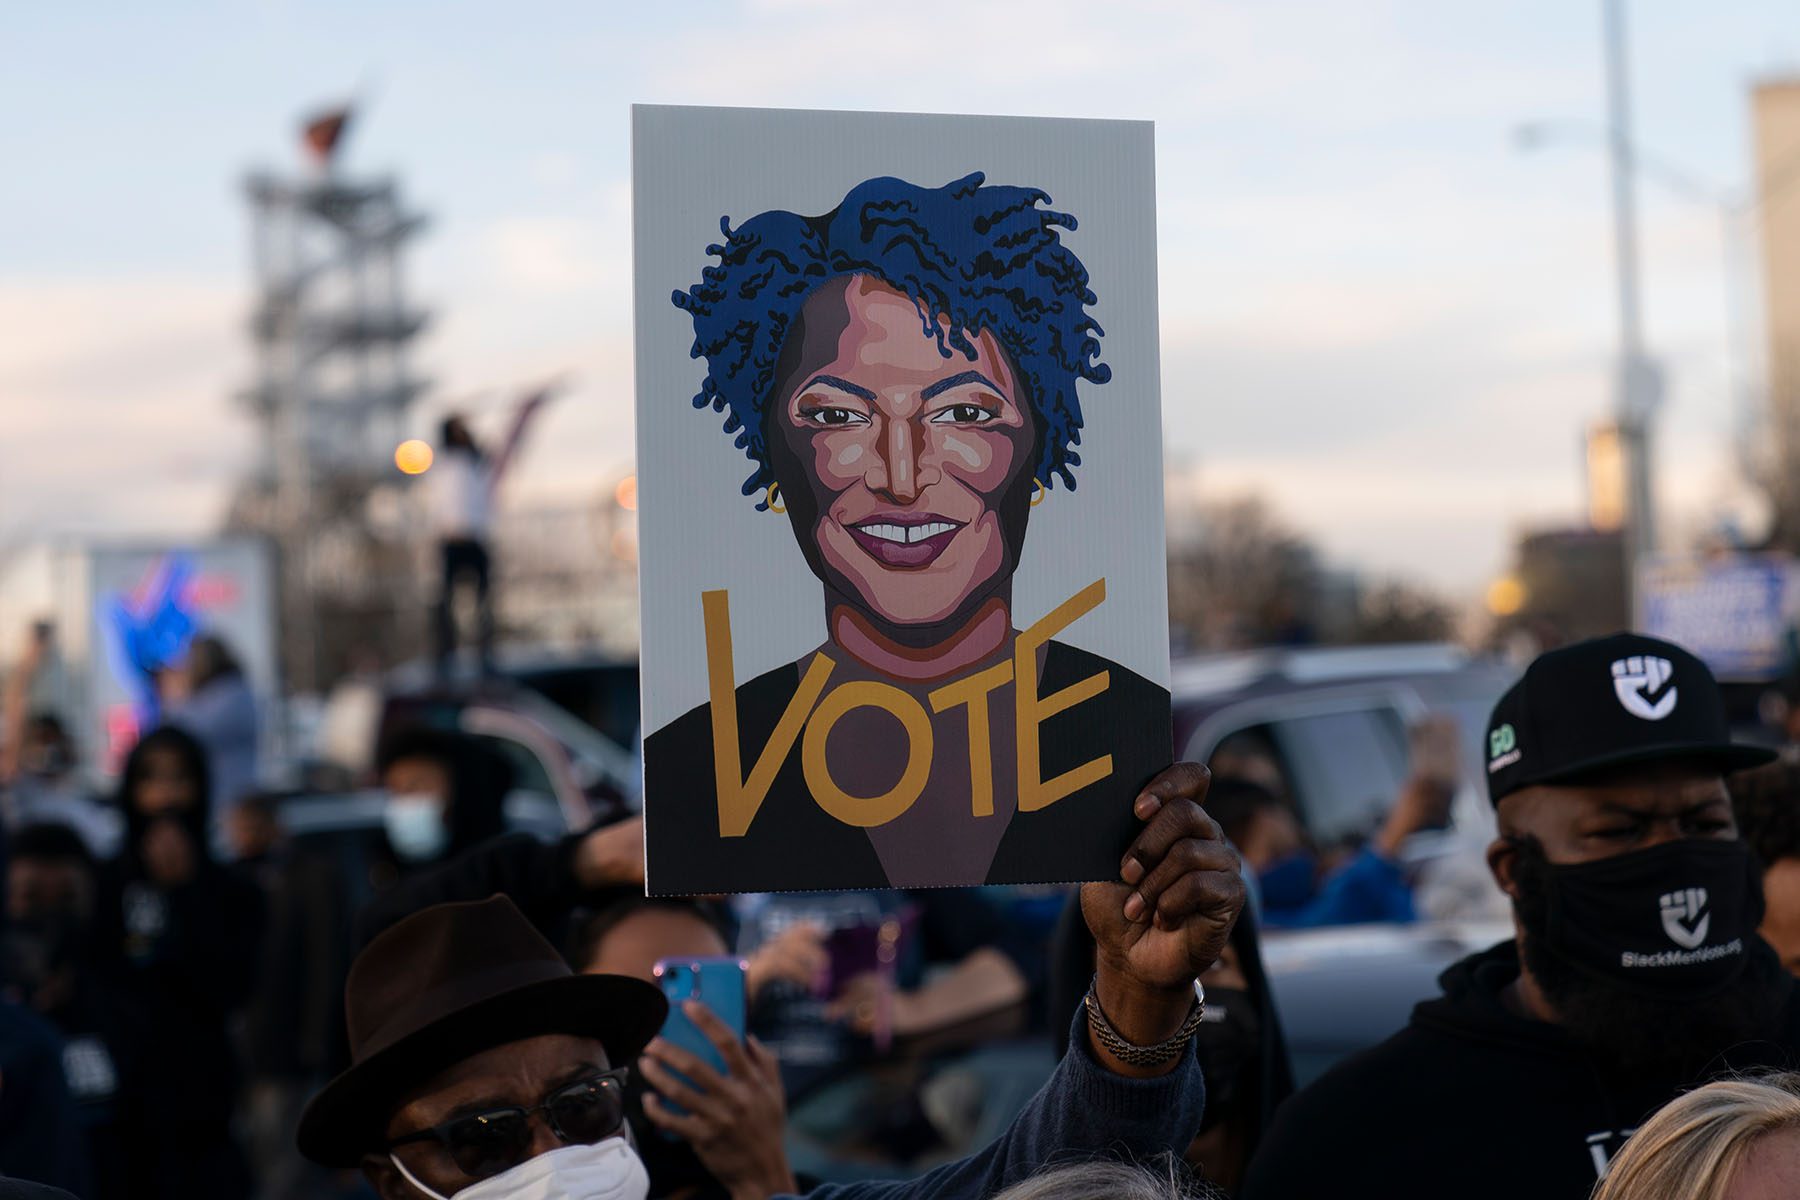 People in the crowd hold up an image of Stacey Abrams that reads "VOTE."